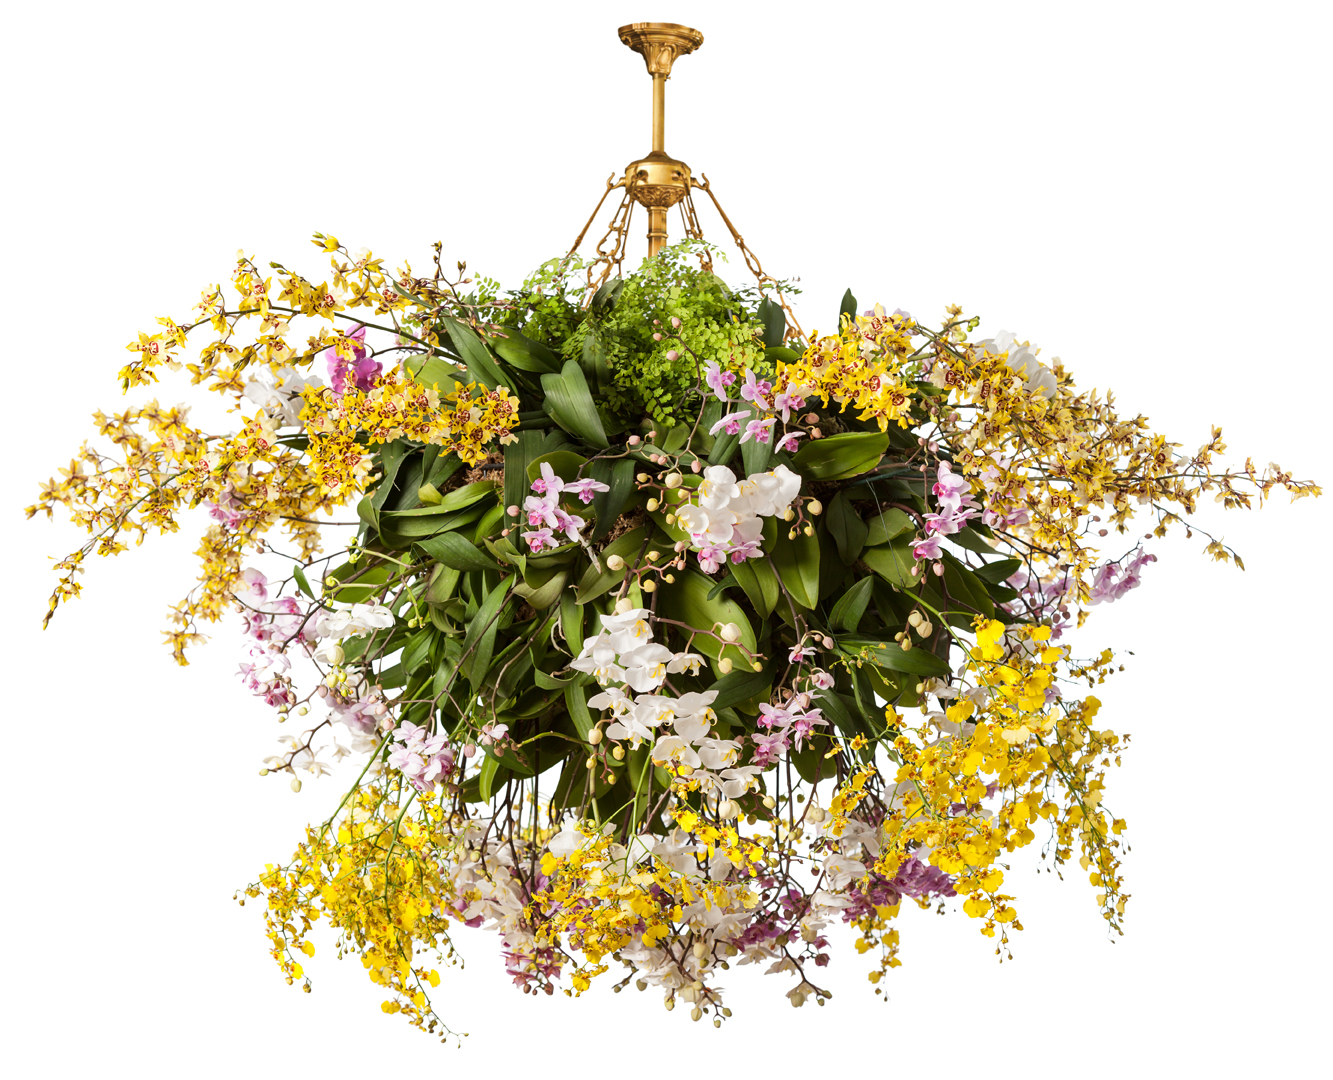 THE ORCHID SHOW: CHANDELIERS